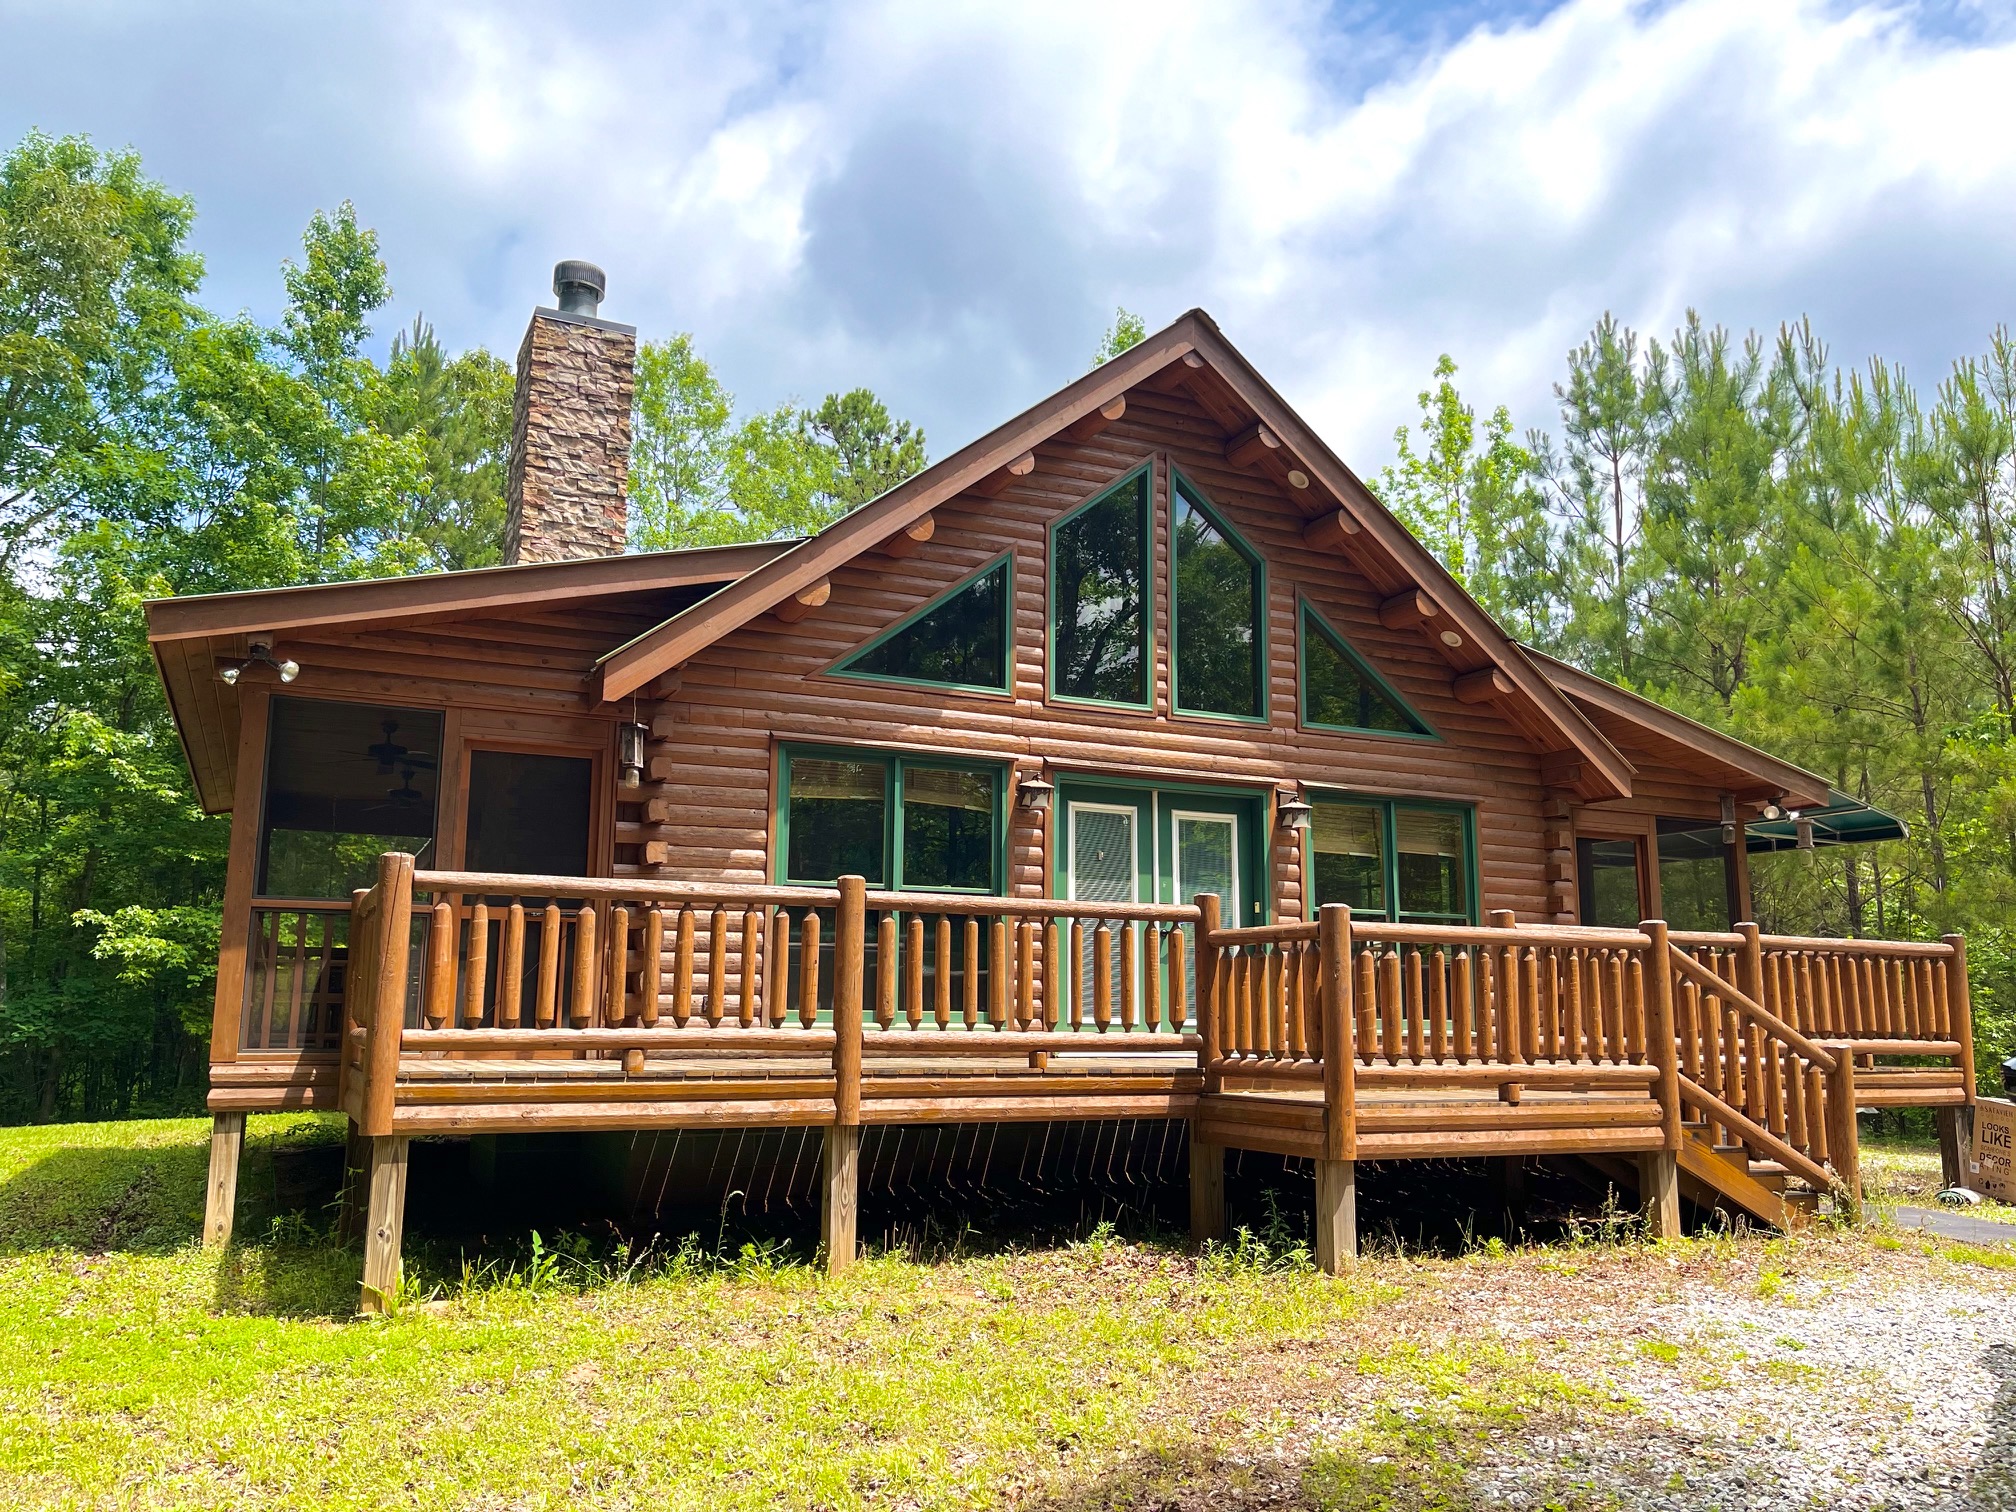 Florida Couples Flock to Pine Mountain, GA for Romantic Getaways at "The 22" Cabin